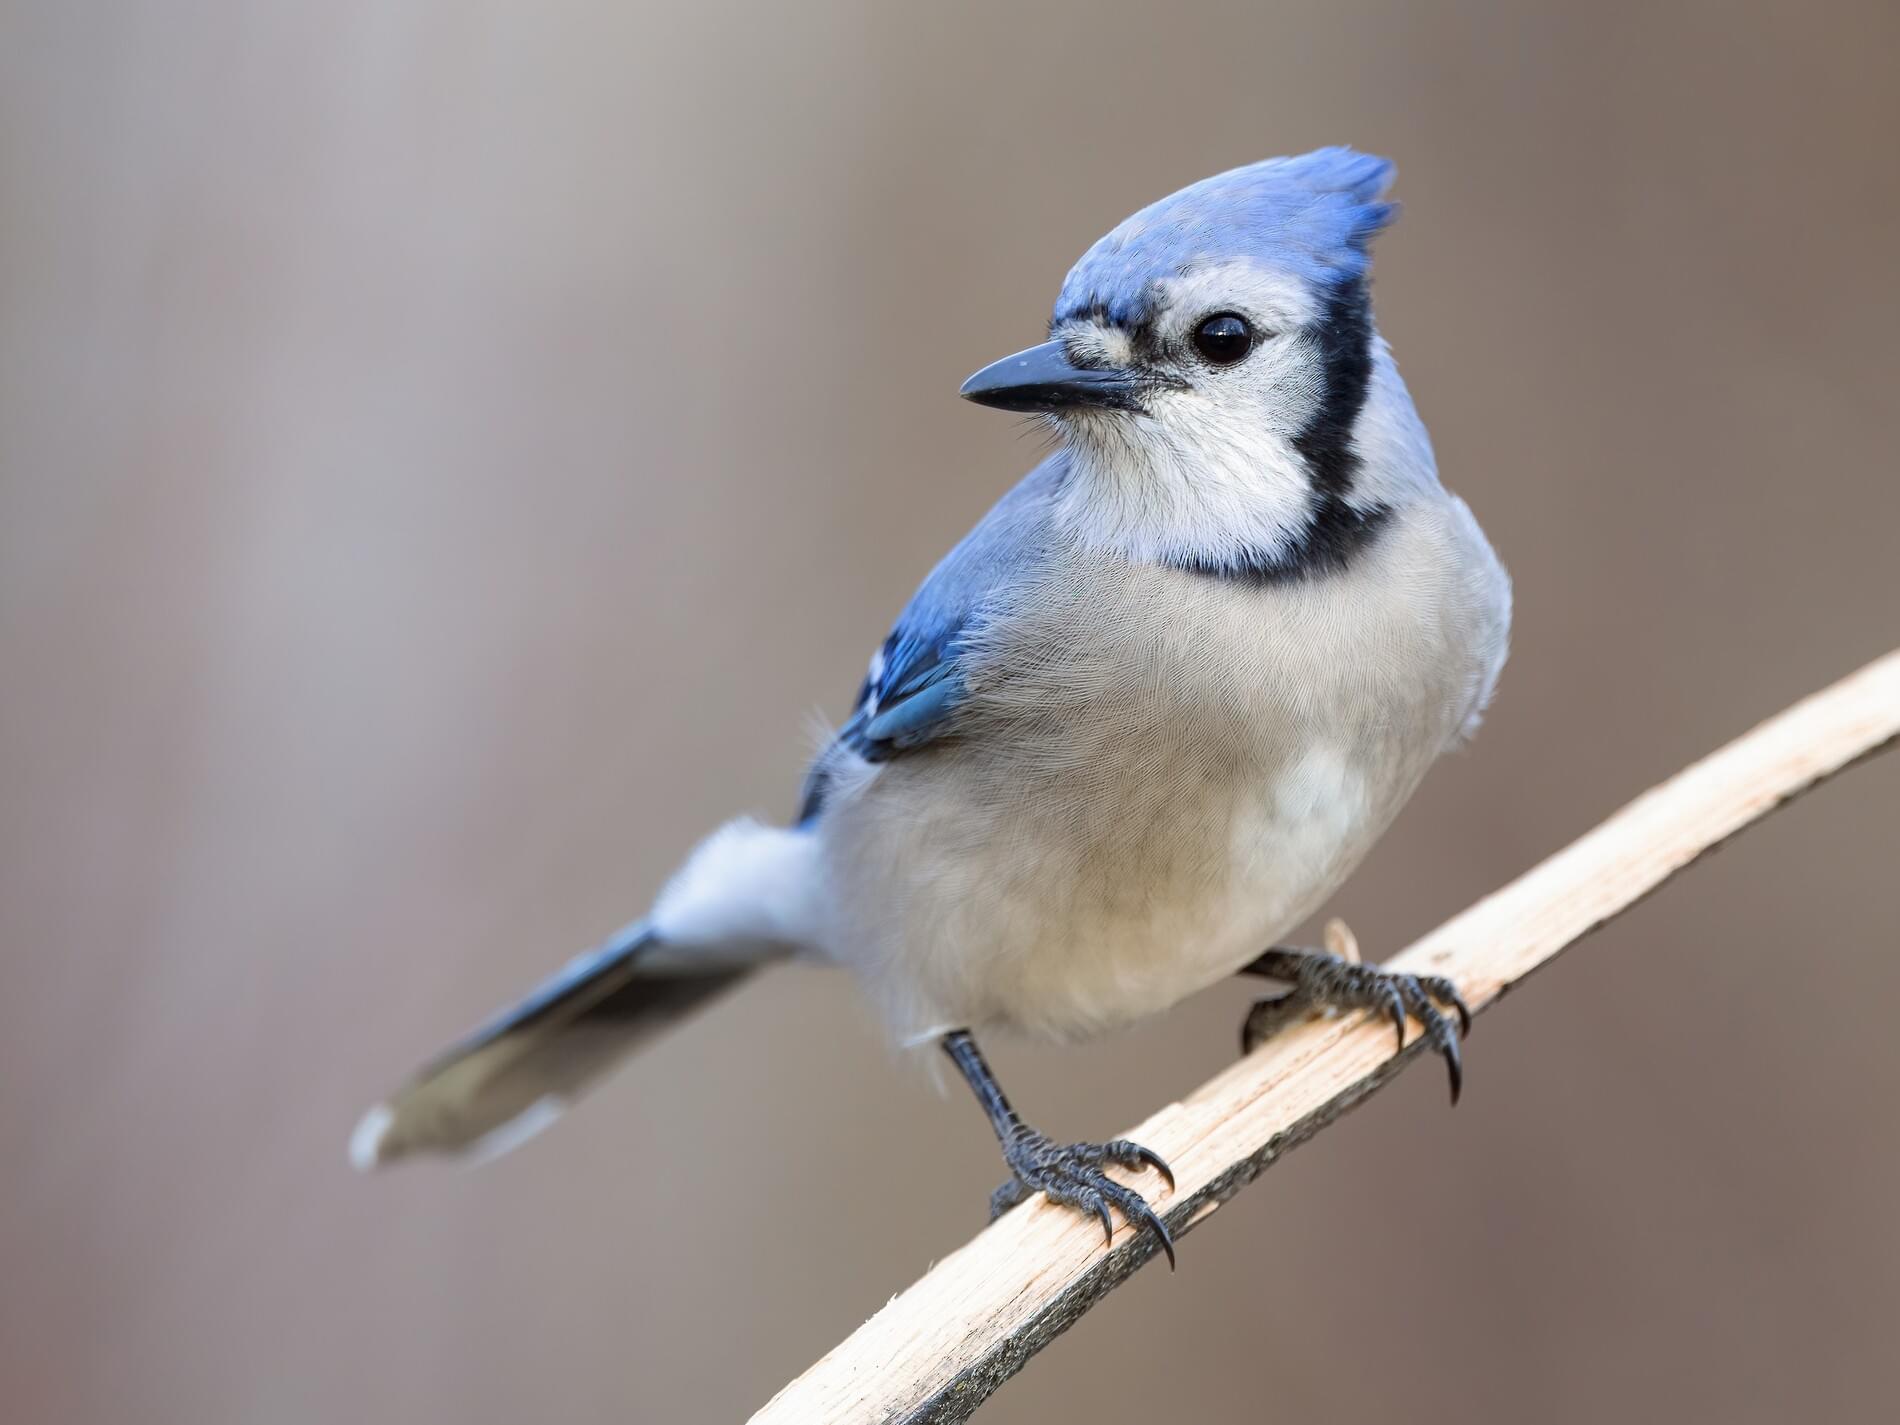 How to Feed Wild Baby Blue Jays